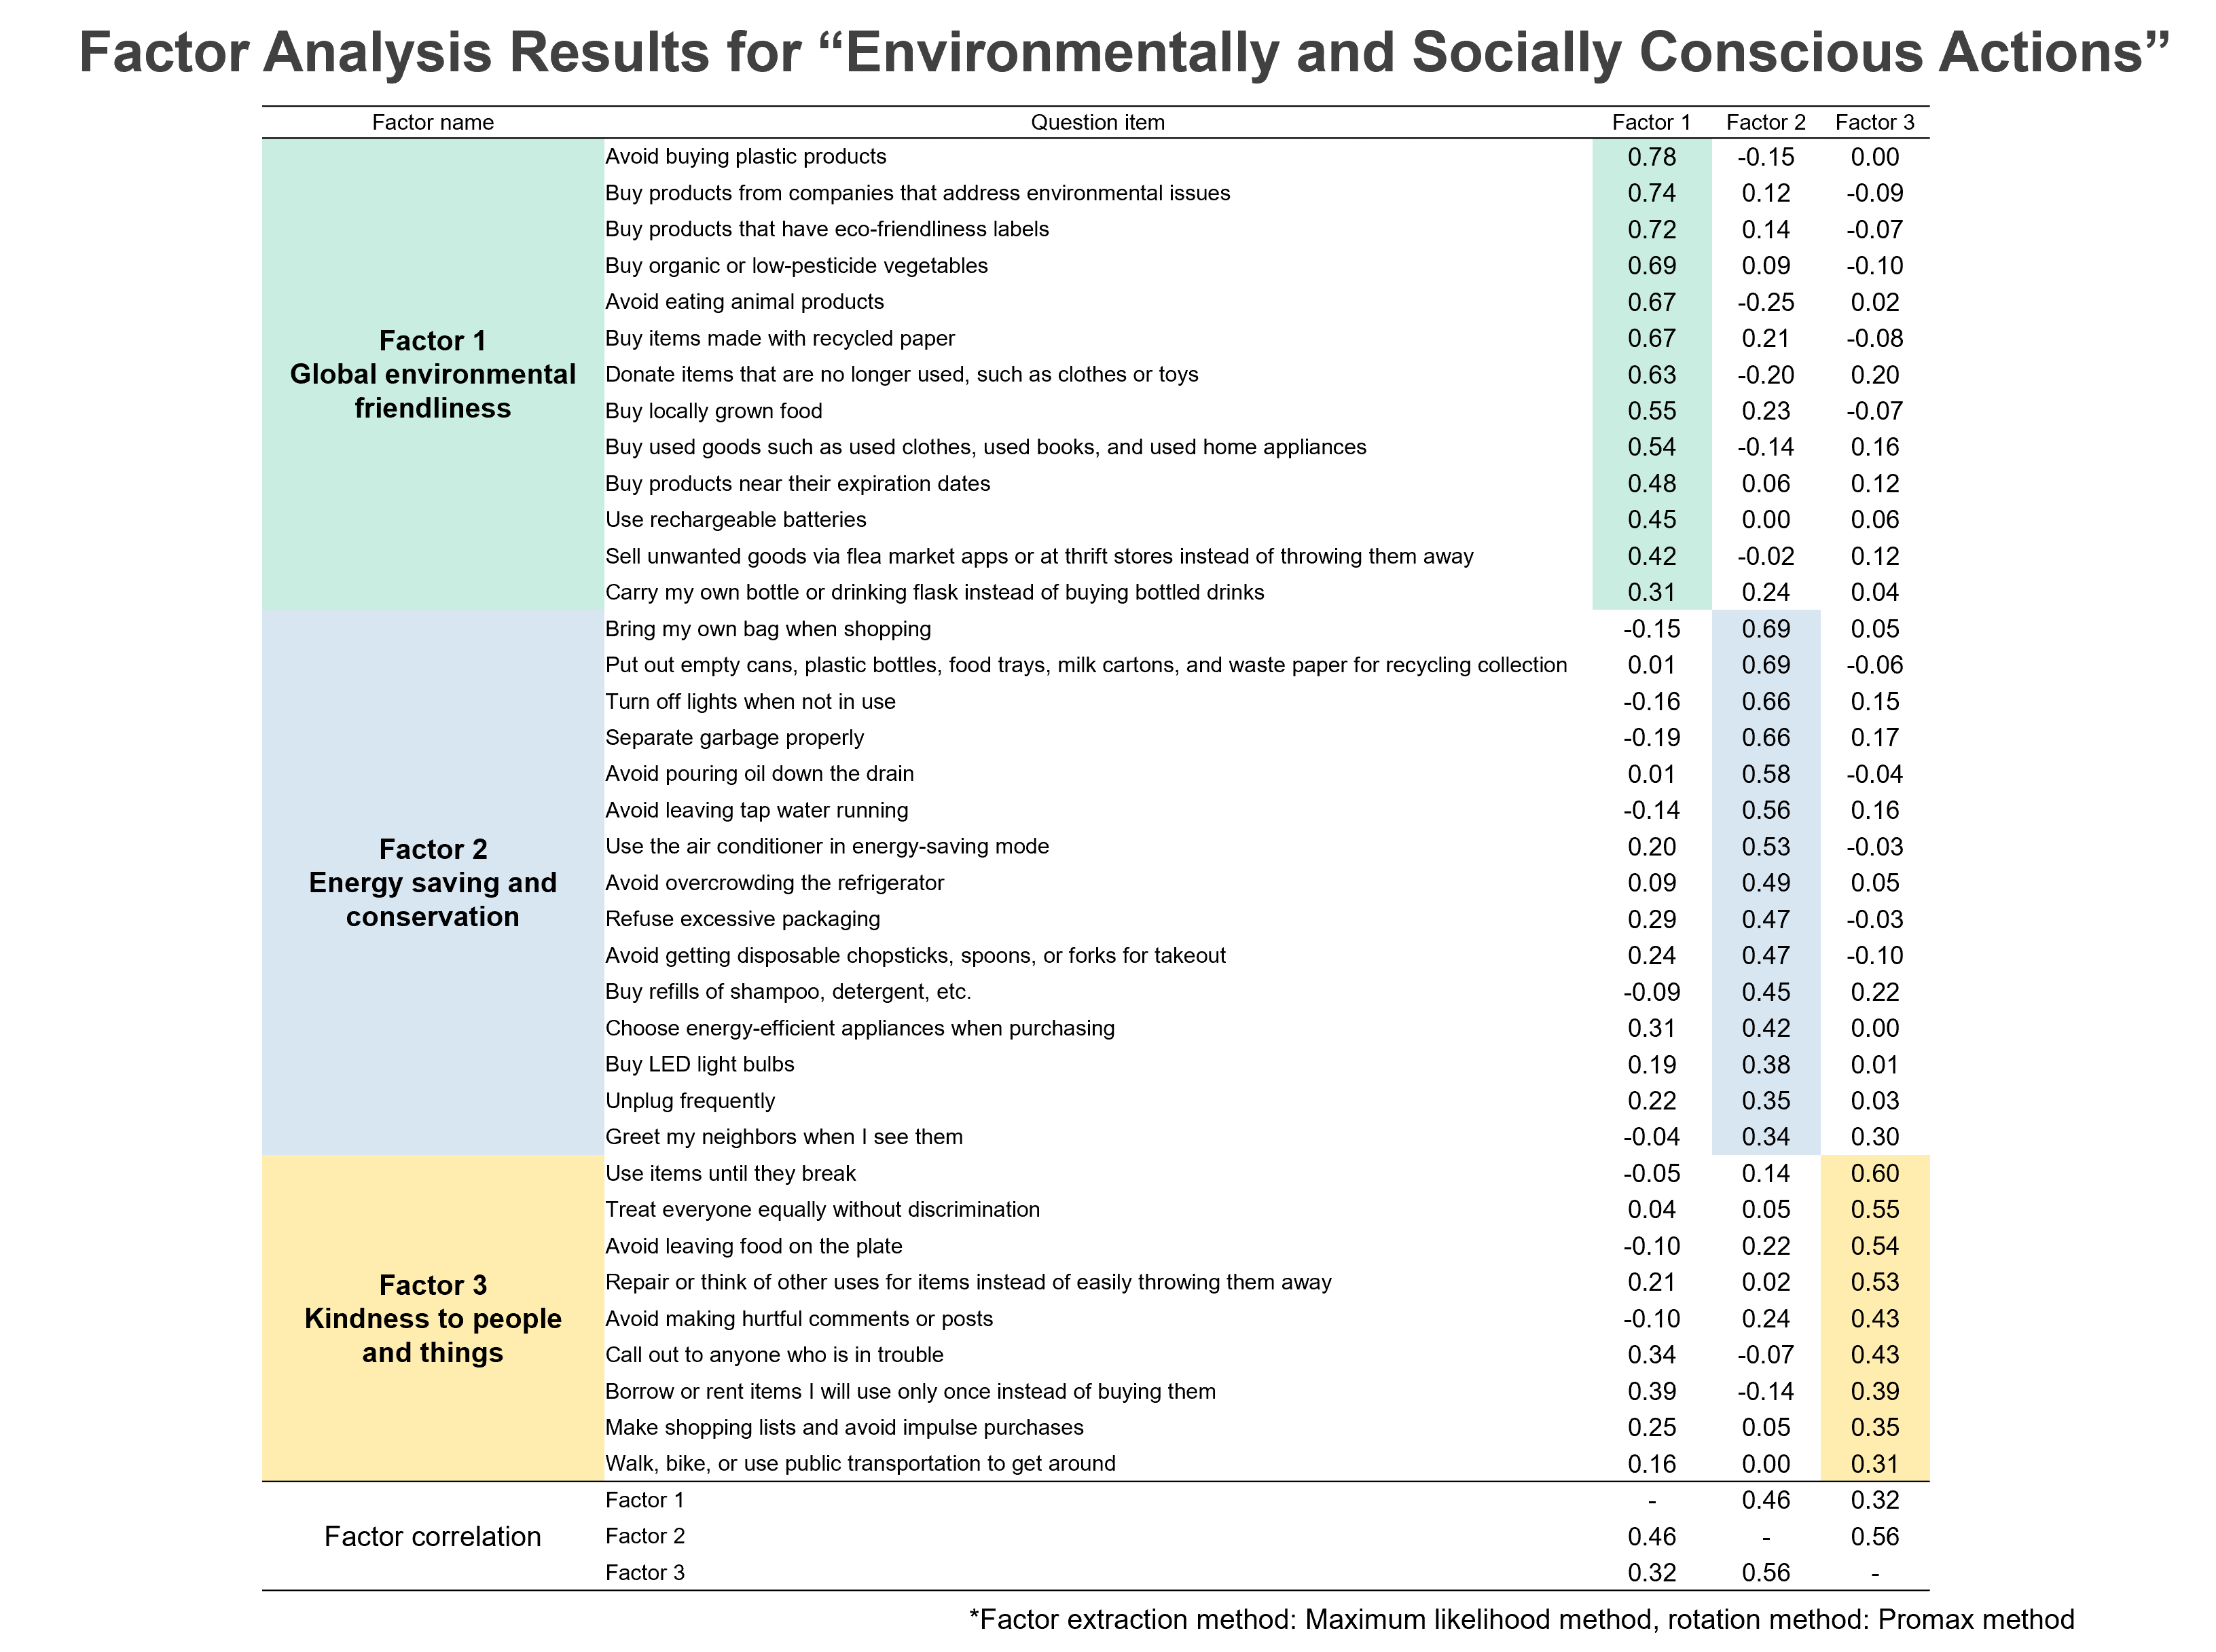 Factor Analysis Results for "Environmentally and Socially Conscious Actions"